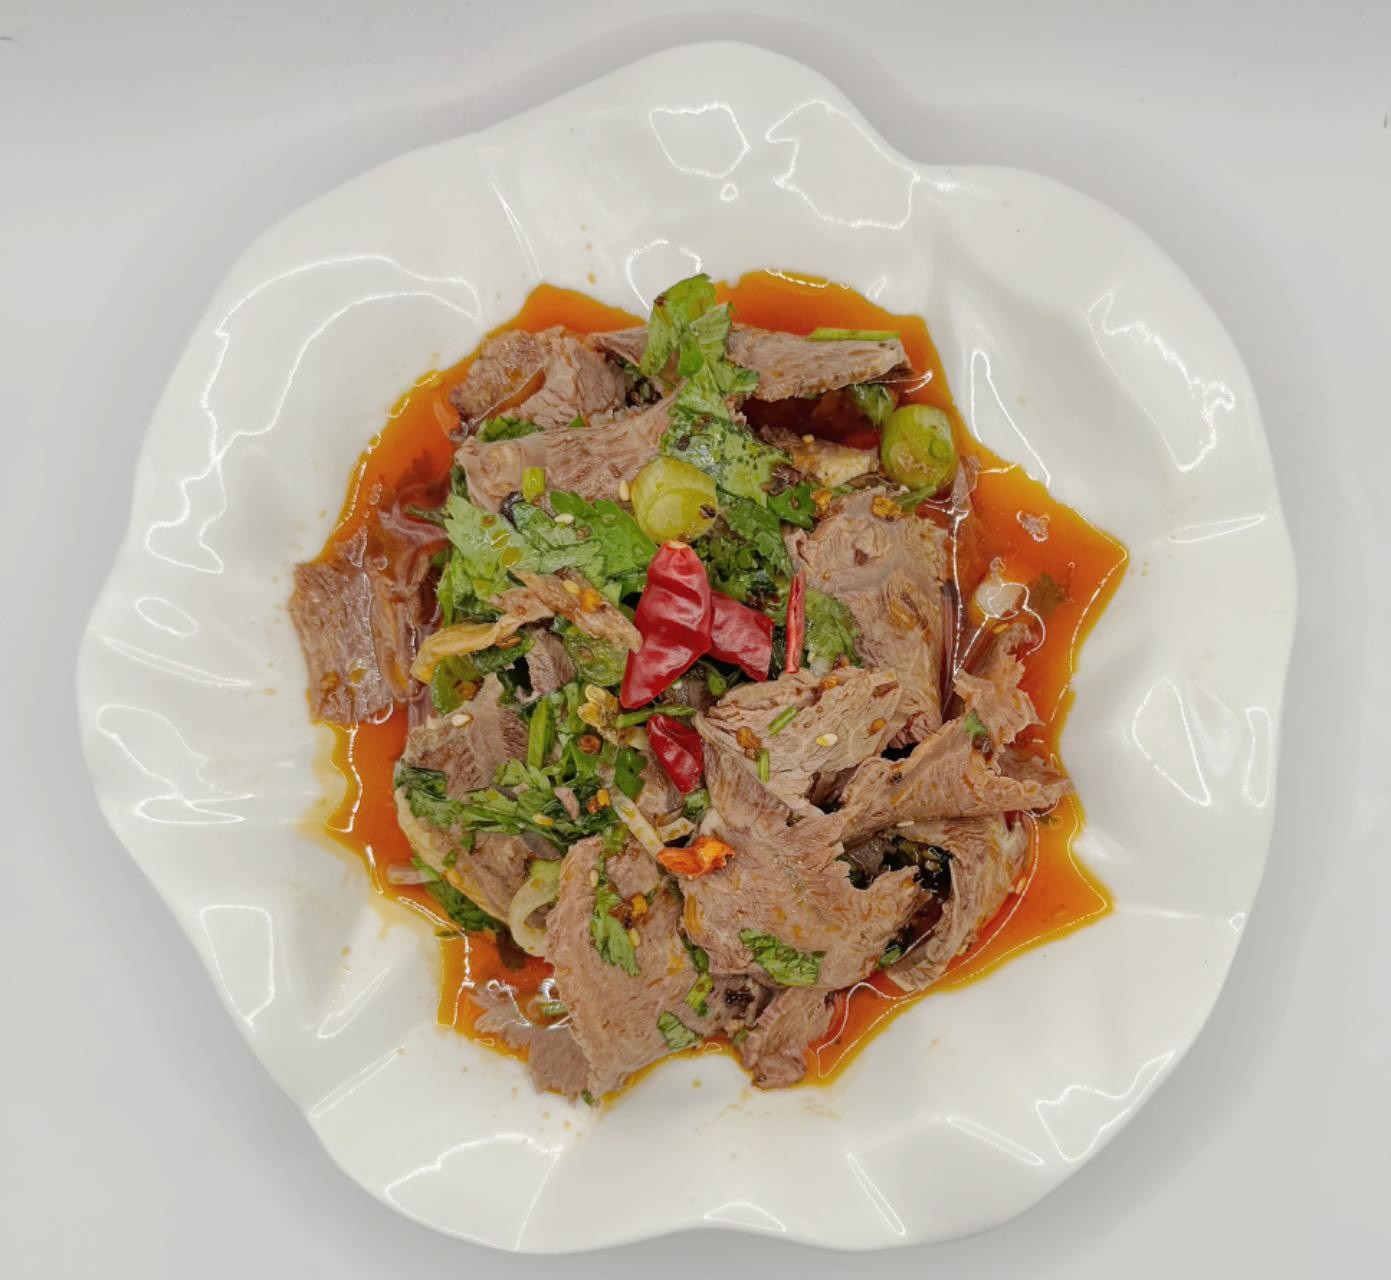 Sliced Beef With Sauce 凉拌牛肉